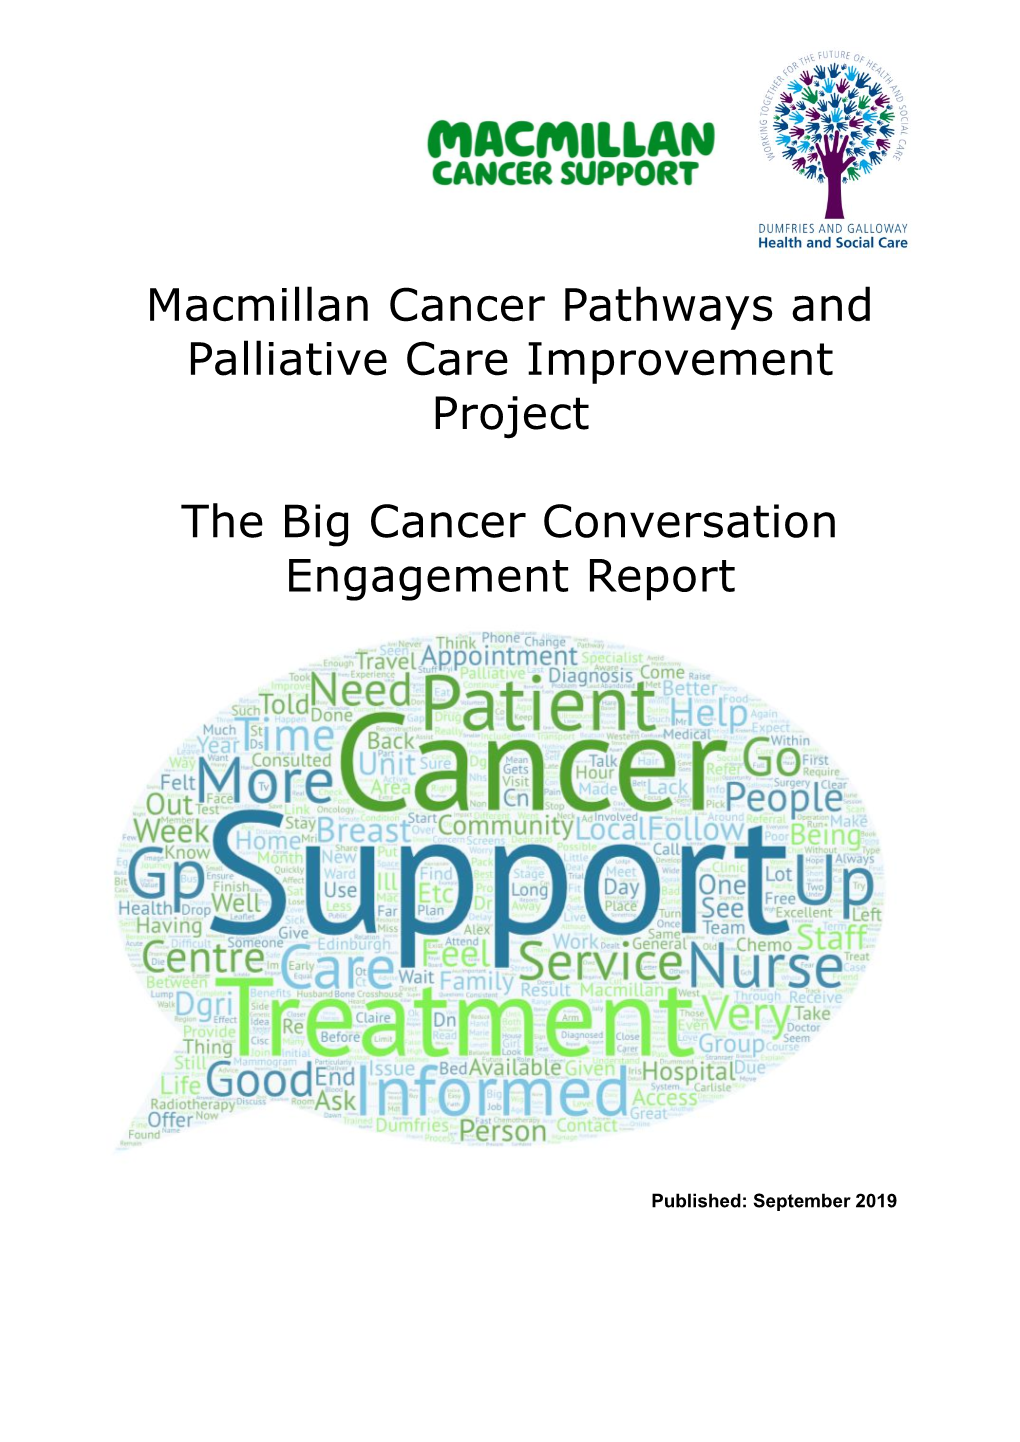 Macmillan Cancer Pathways and Palliative Care Improvement Project